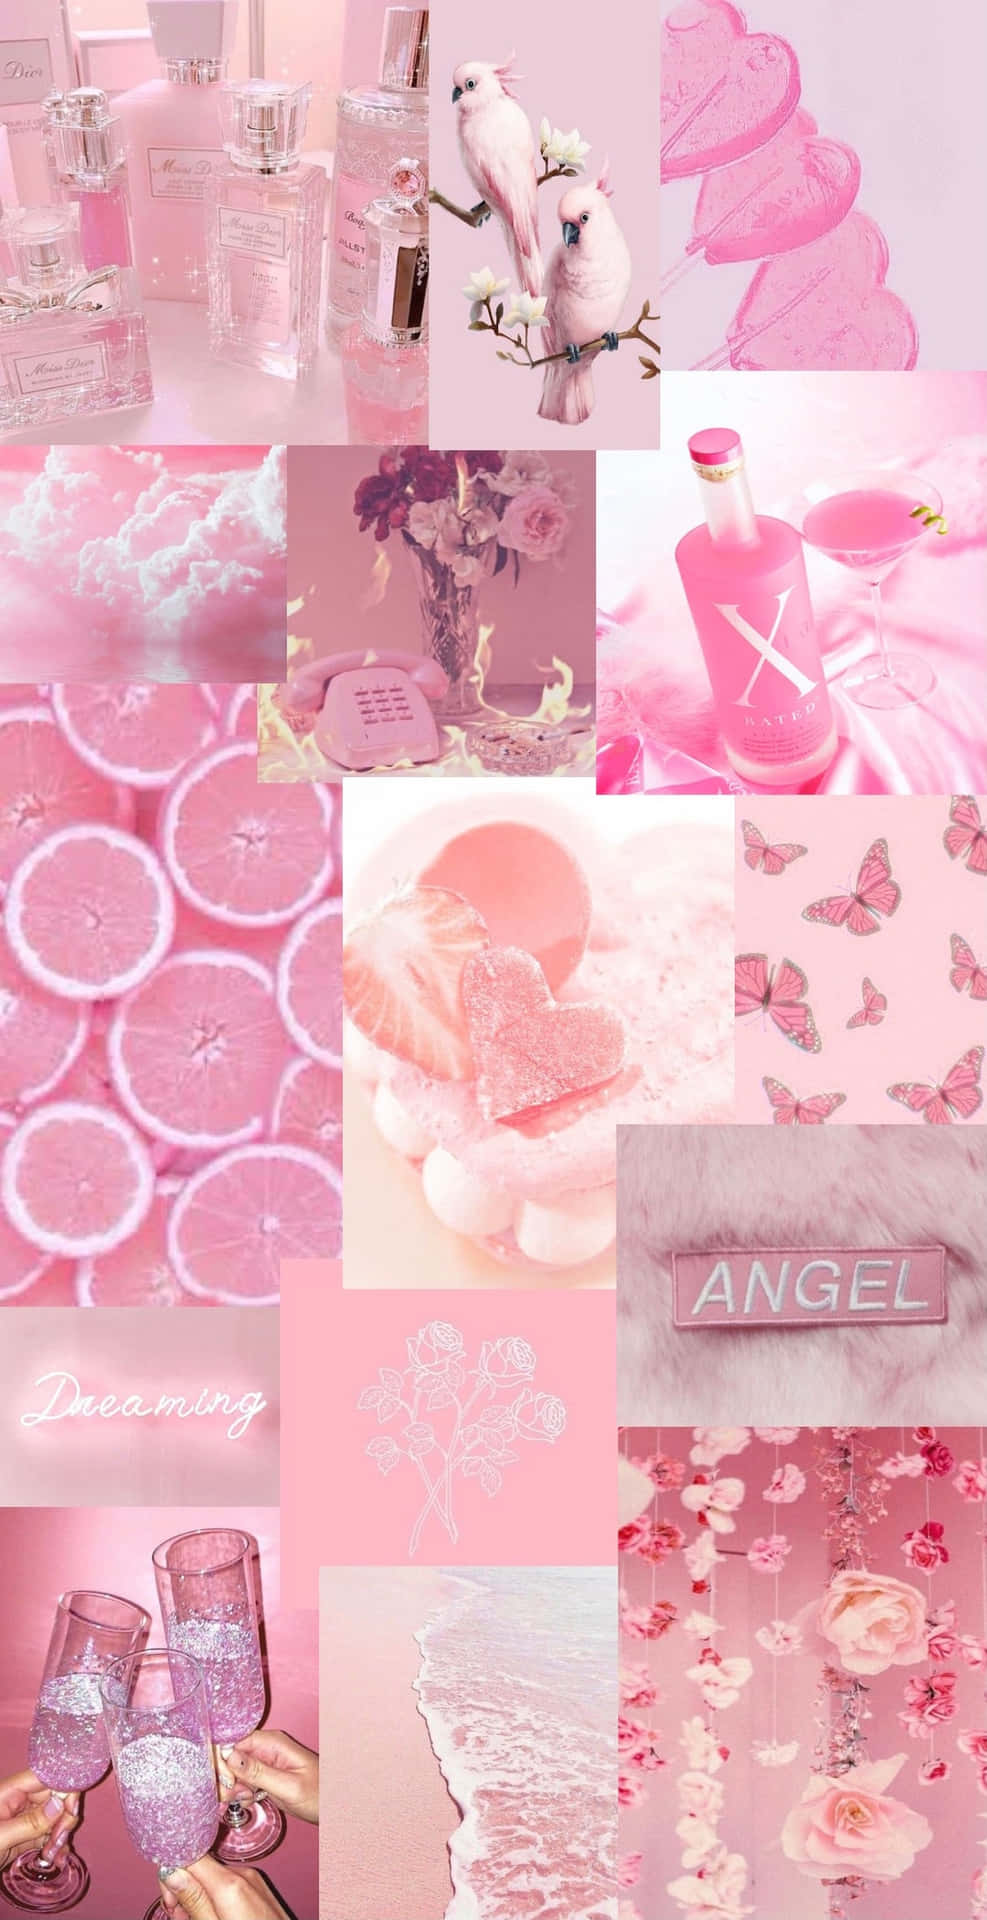 Pink aesthetic, clouds, cute, glitter, hello kitty, pastel, soft